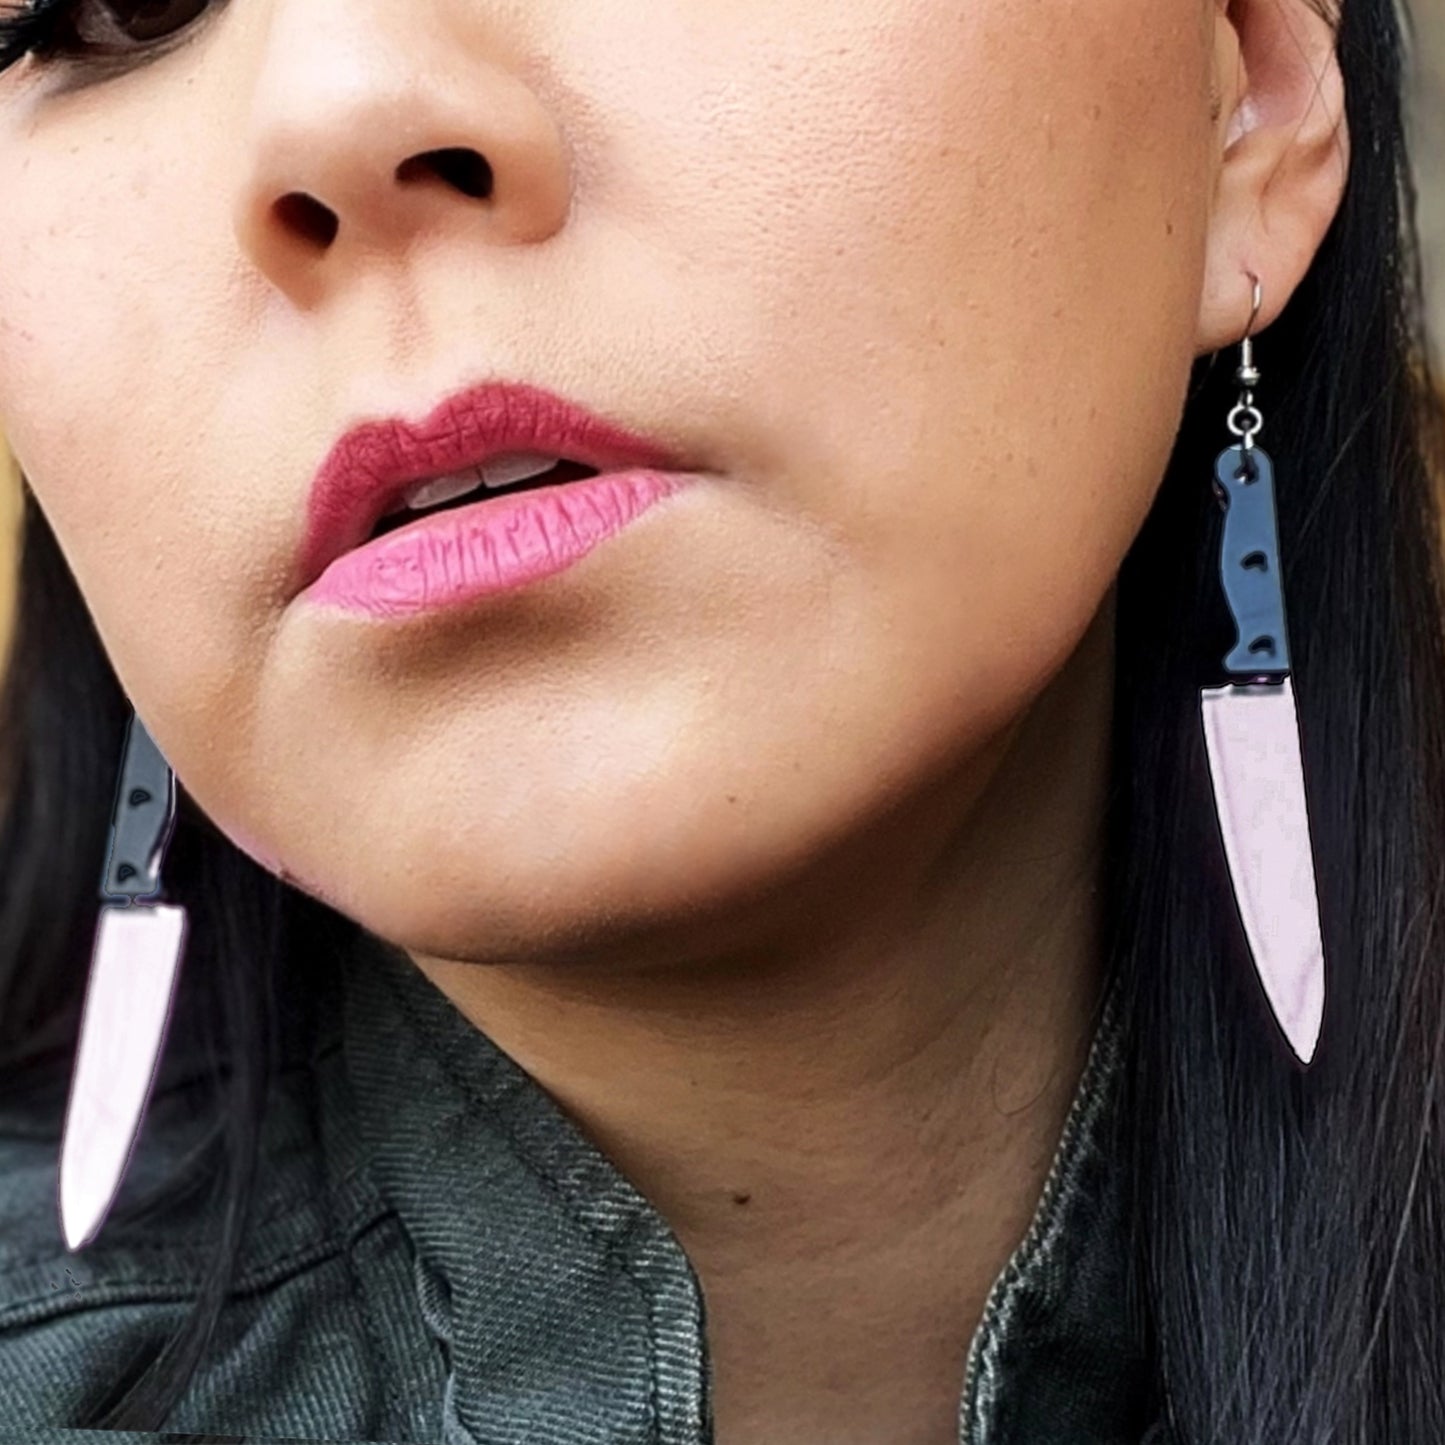 Close up a woman's face. In her ears are earrings shaped like chef's knives.